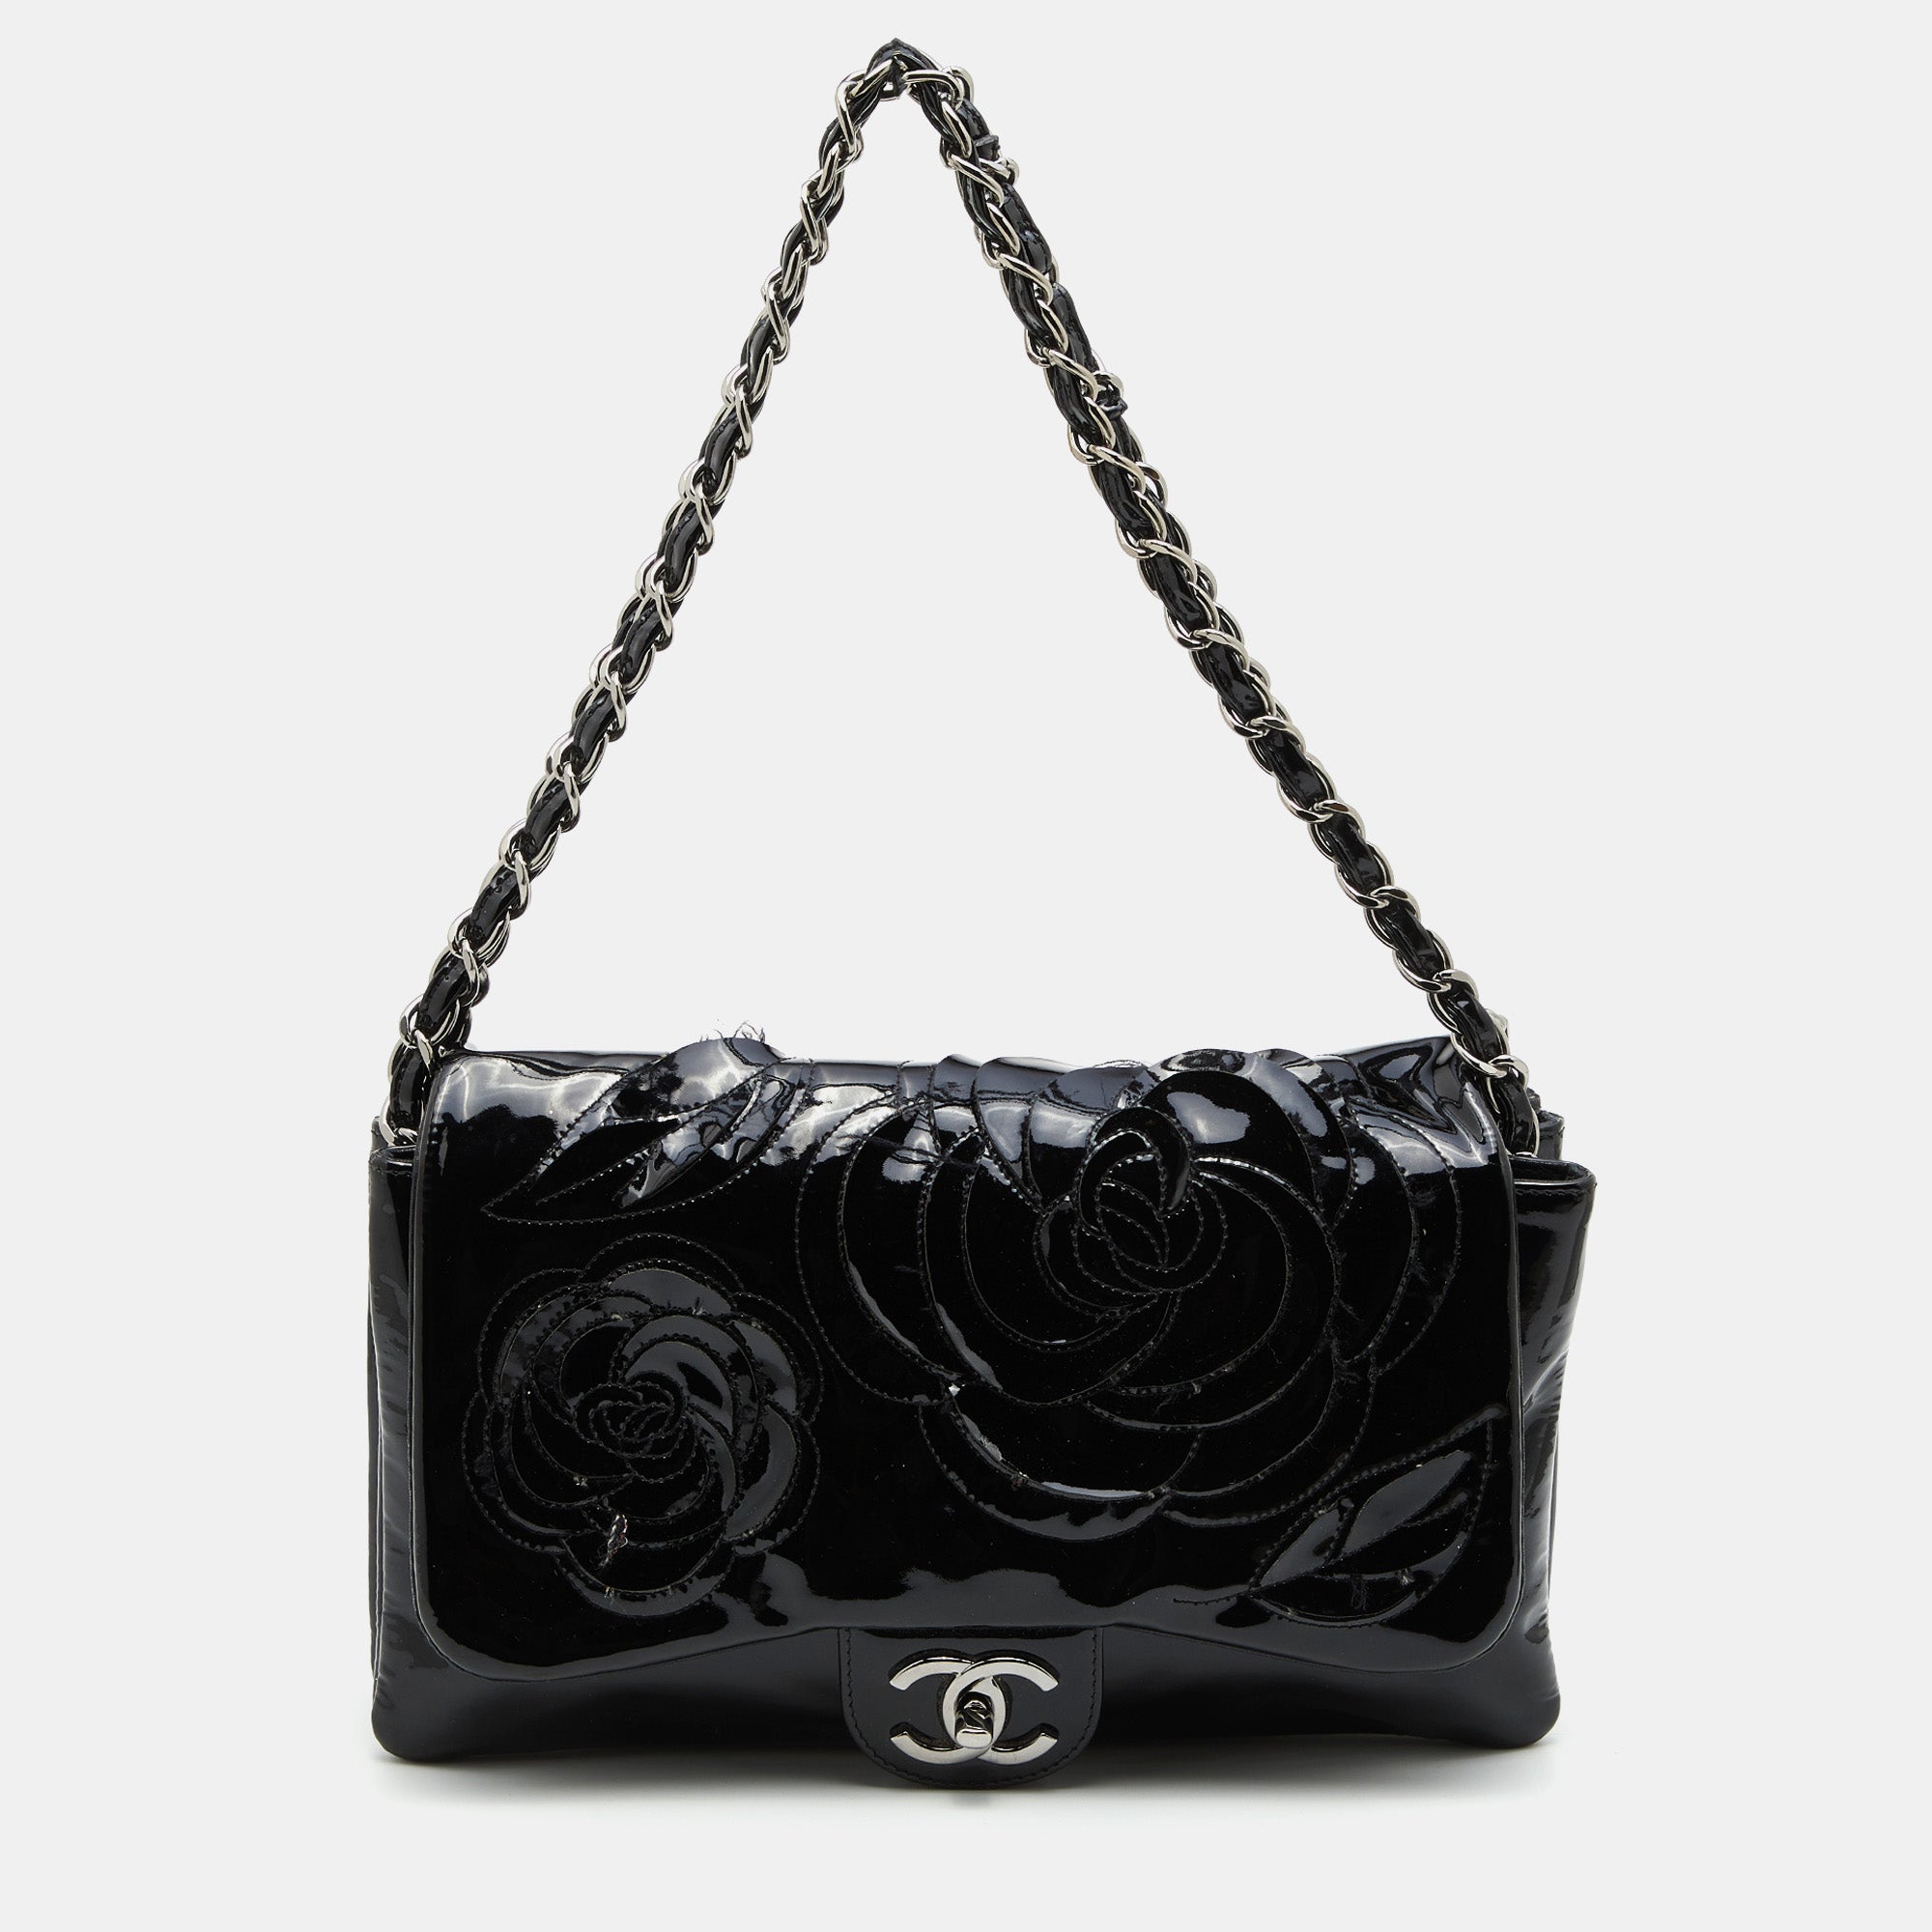 Chanel Cambon Quilted Lambskin Camellia No. 5 Flap Black Patent Leather Shoulder Bag